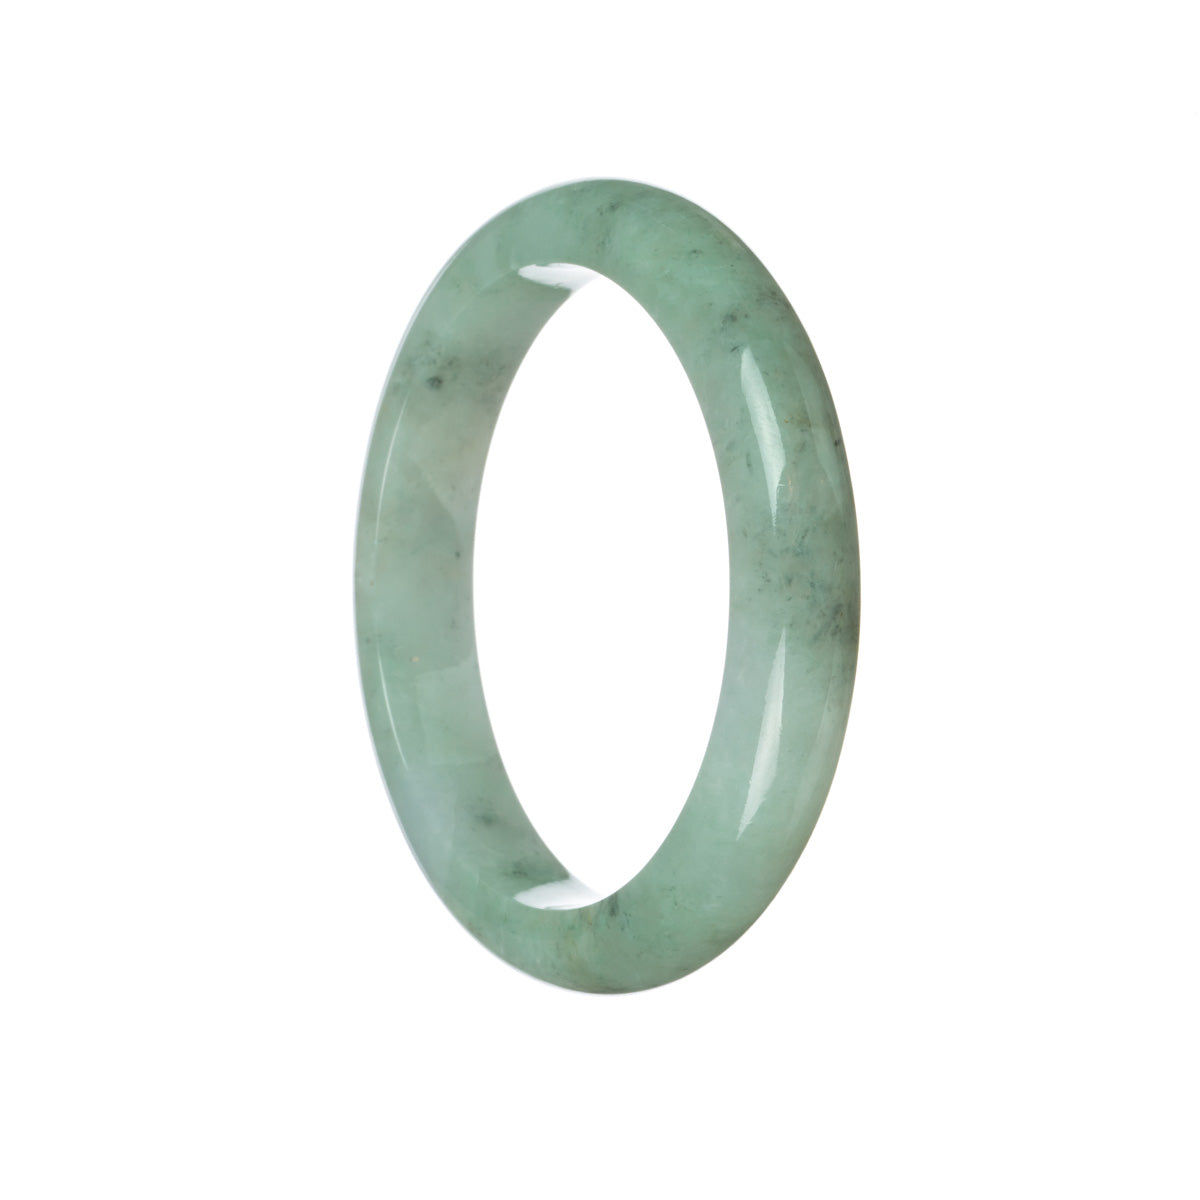 A traditional jade bracelet in light grey with grey spots, featuring a real Type A jade stone. The bracelet is 60mm in size and has a semi-round shape. Created by MAYS GEMS.